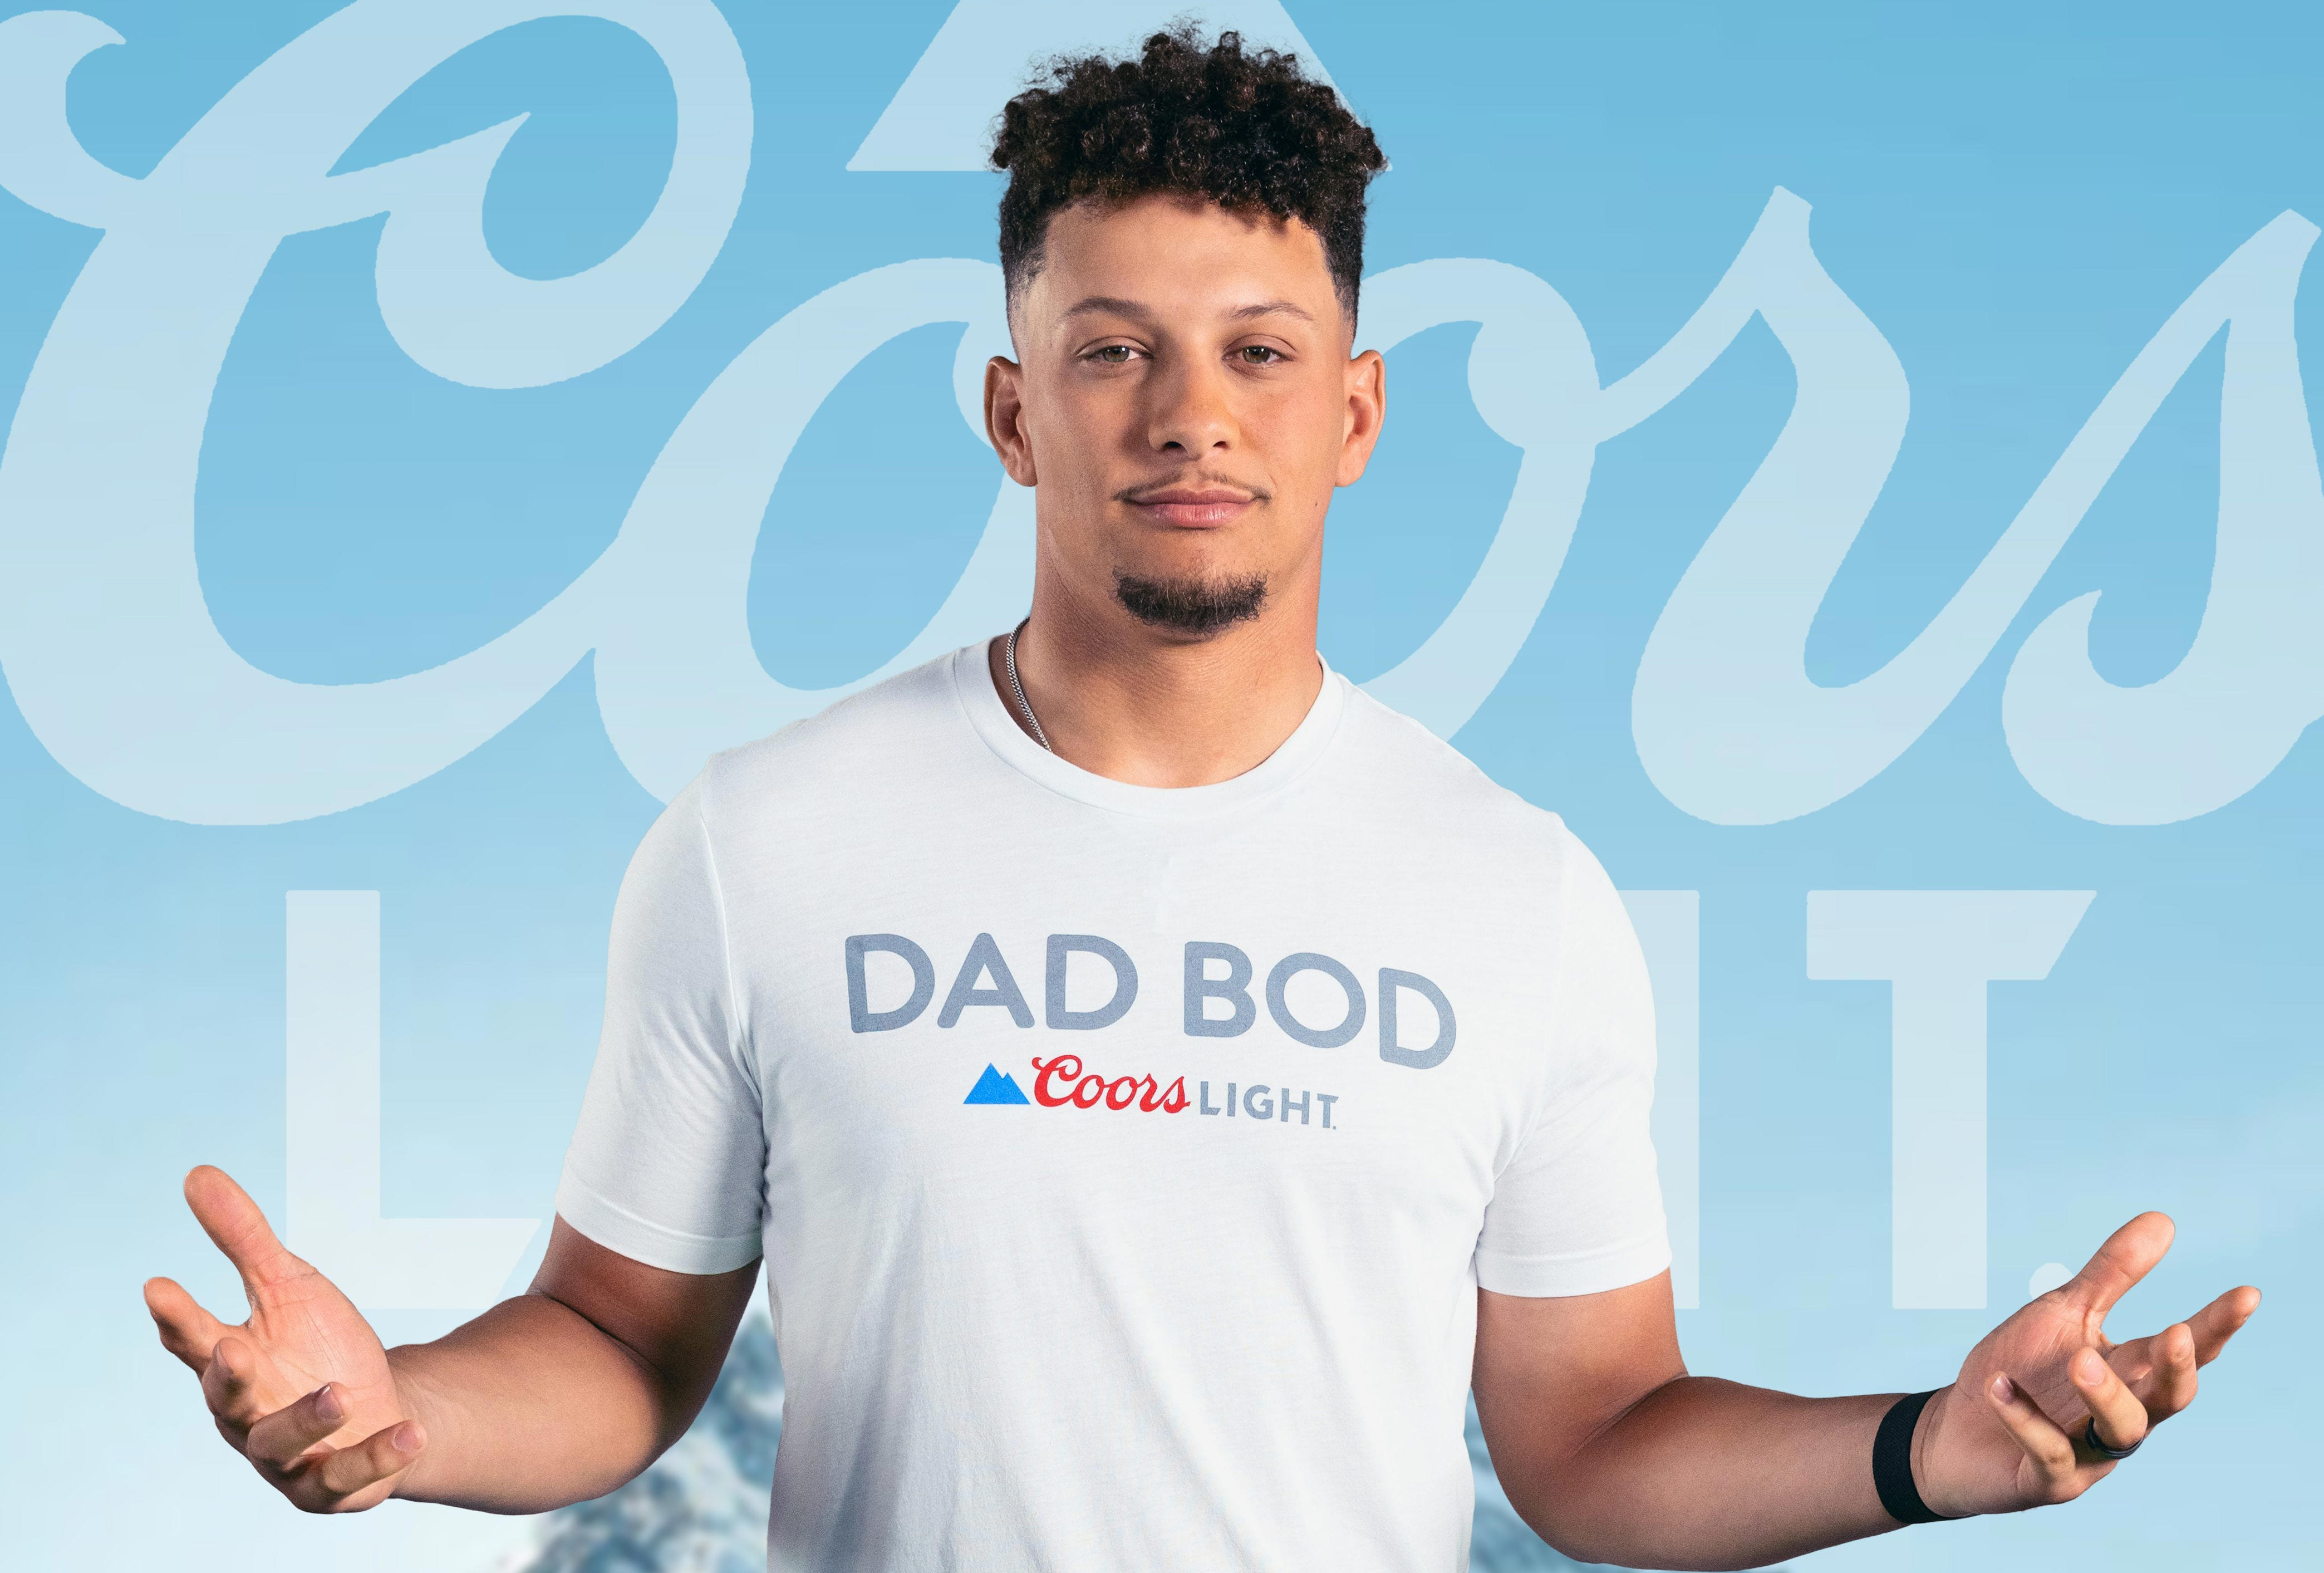 coors light launches 'dad bod' shirts inspired by chiefs qb patrick mahomes